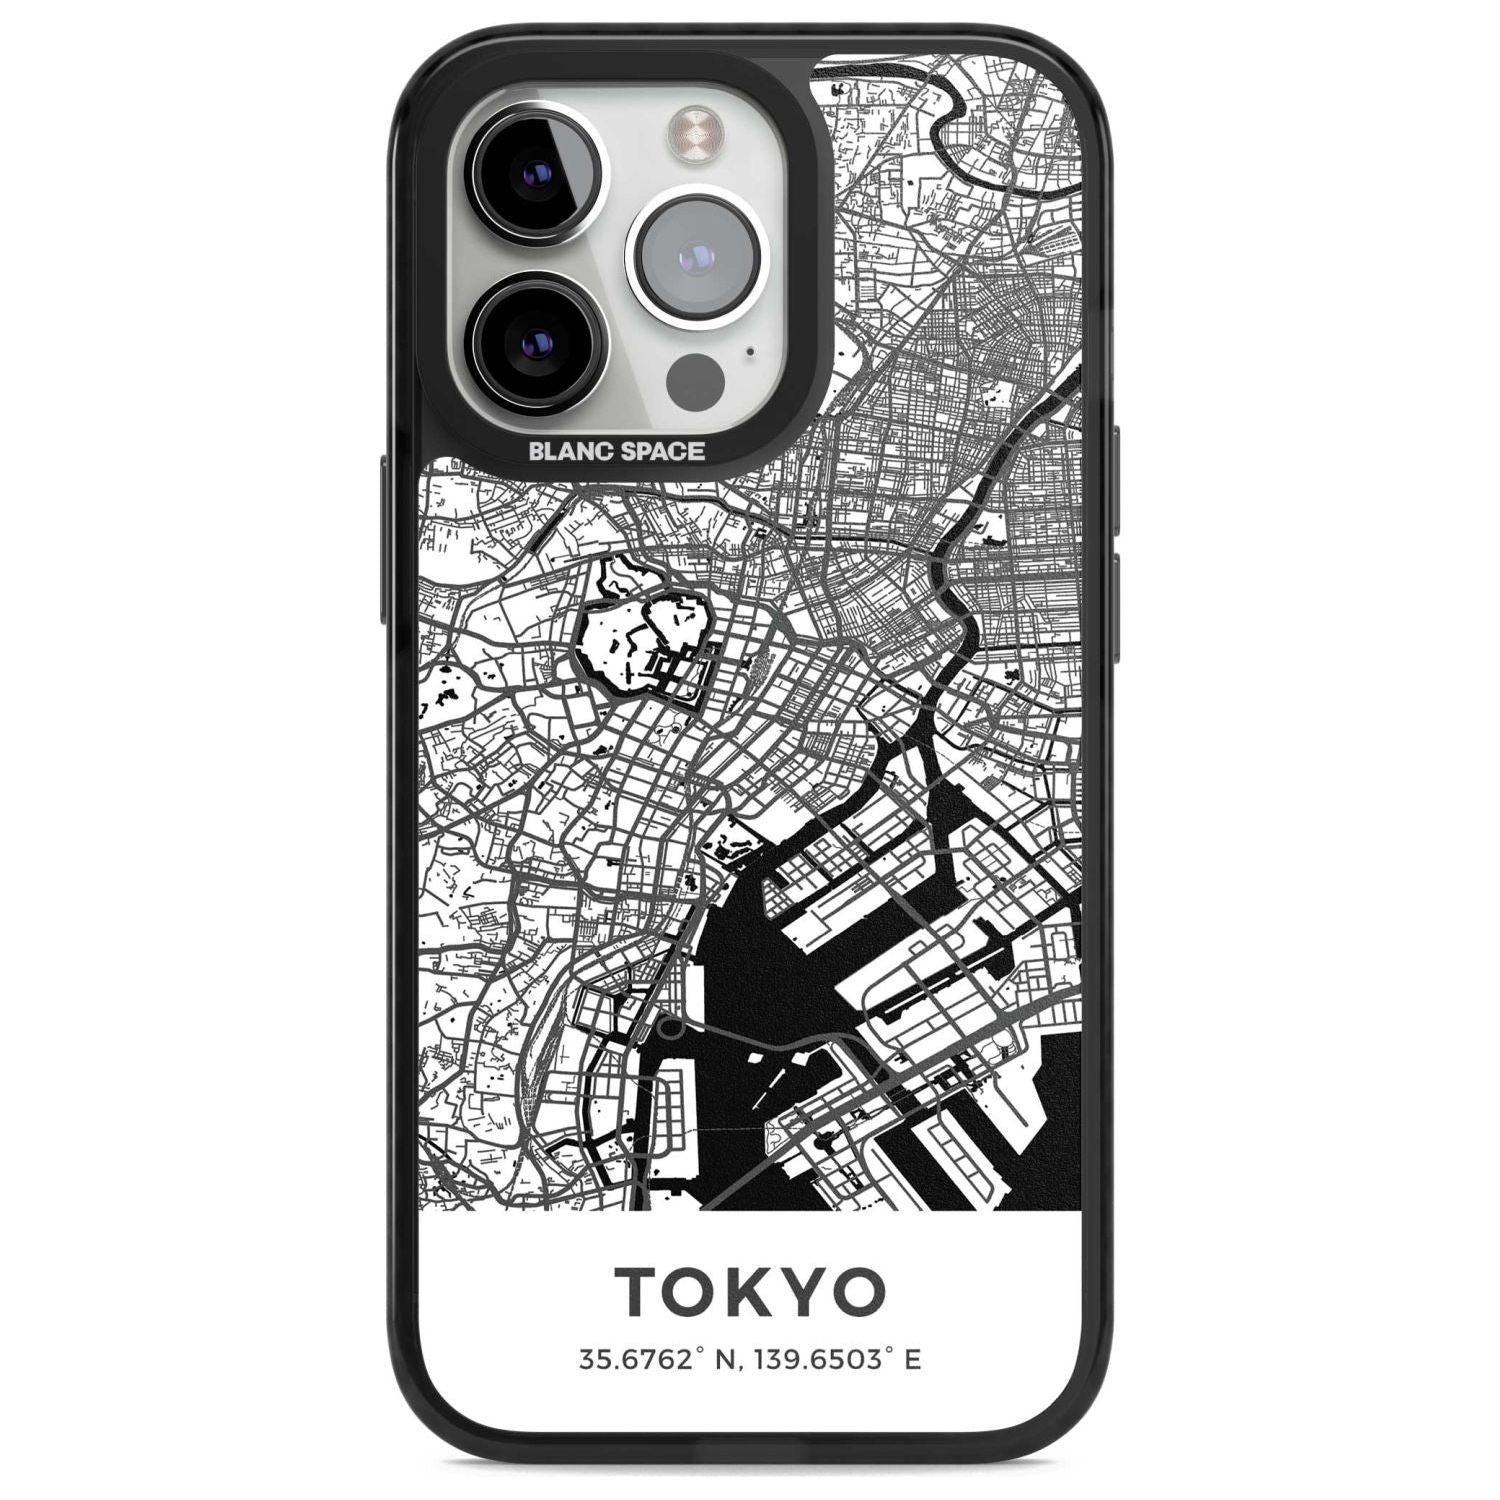 Map of Tokyo, Japan Phone Case iPhone 15 Pro Max / Magsafe Black Impact Case,iPhone 15 Pro / Magsafe Black Impact Case,iPhone 14 Pro Max / Magsafe Black Impact Case,iPhone 14 Pro / Magsafe Black Impact Case,iPhone 13 Pro / Magsafe Black Impact Case Blanc Space